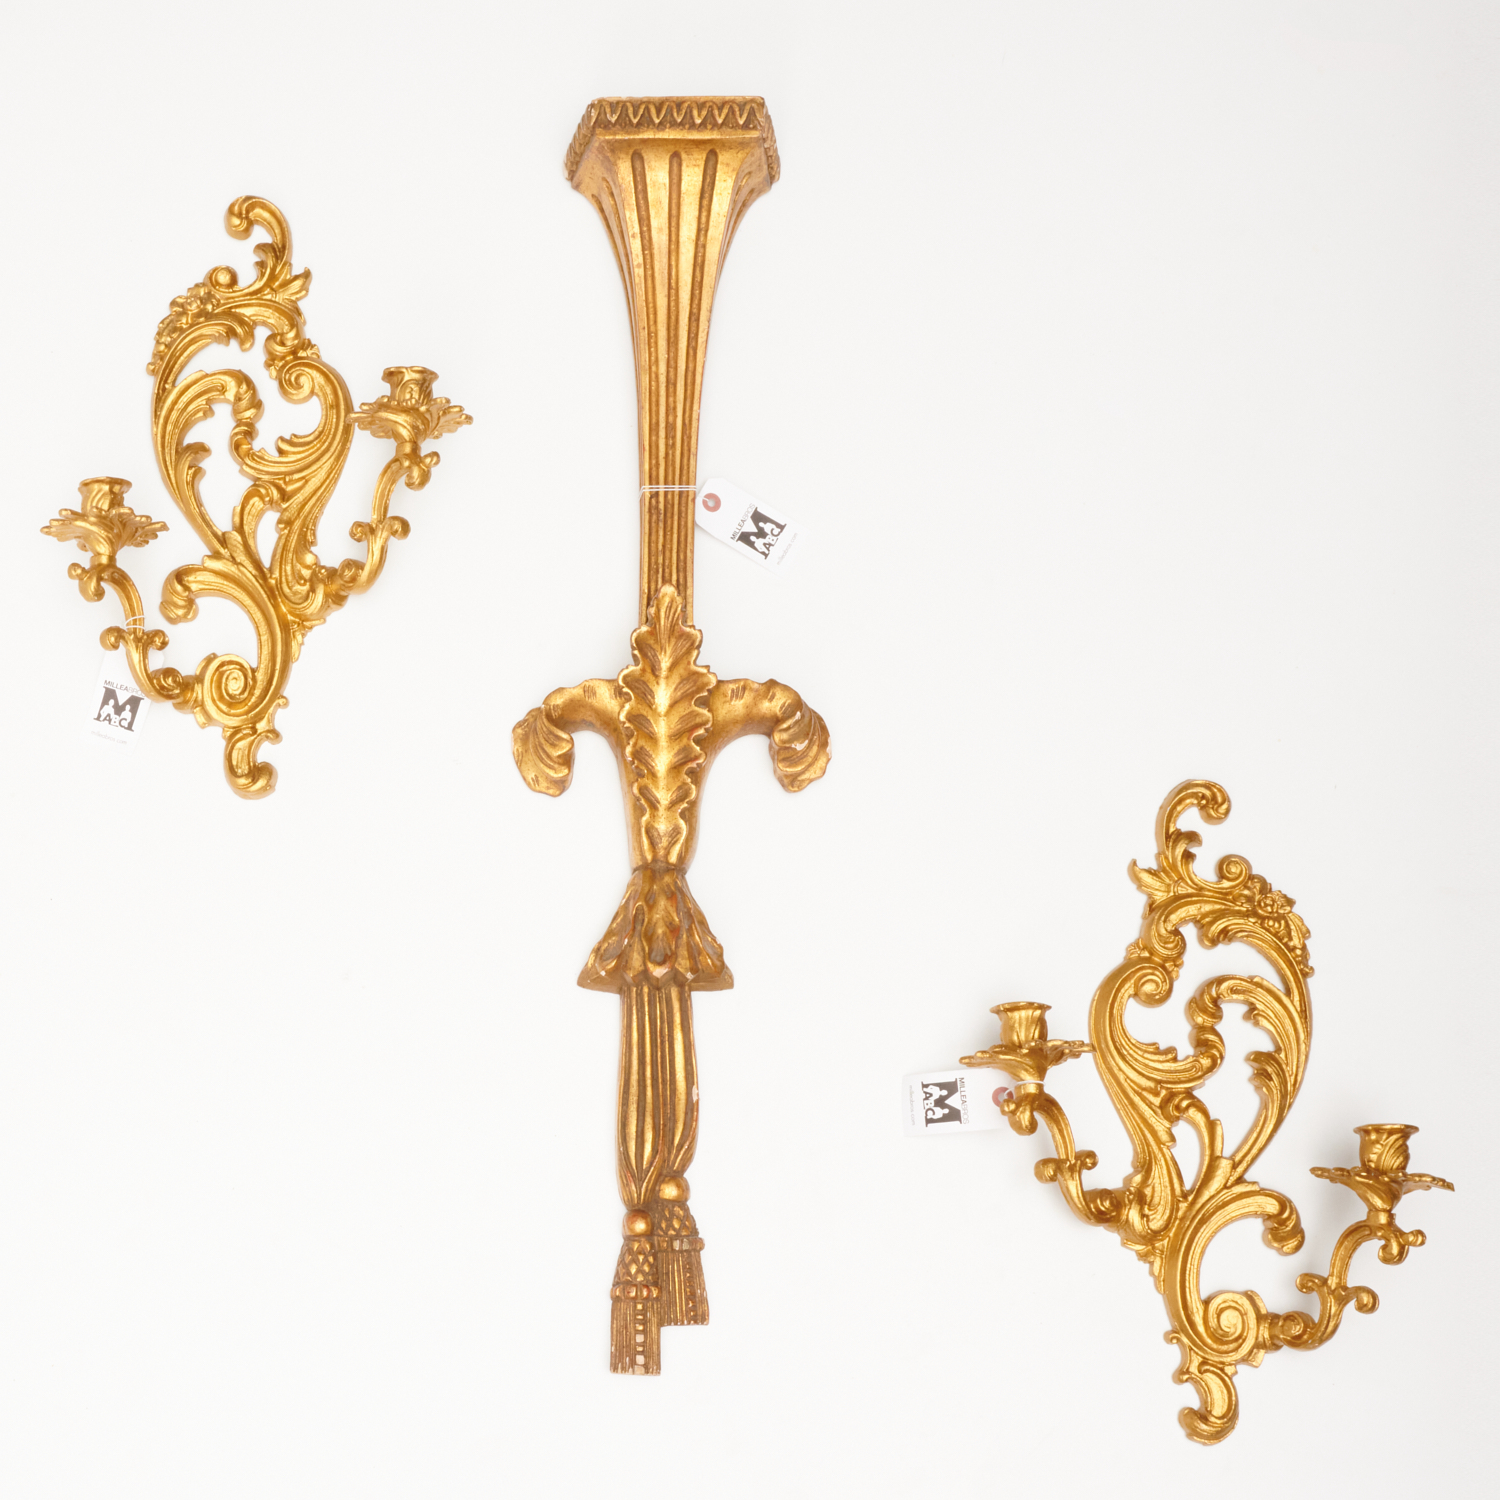 PAIR ROCOCO STYLE SCONCES AND GILTWOOD